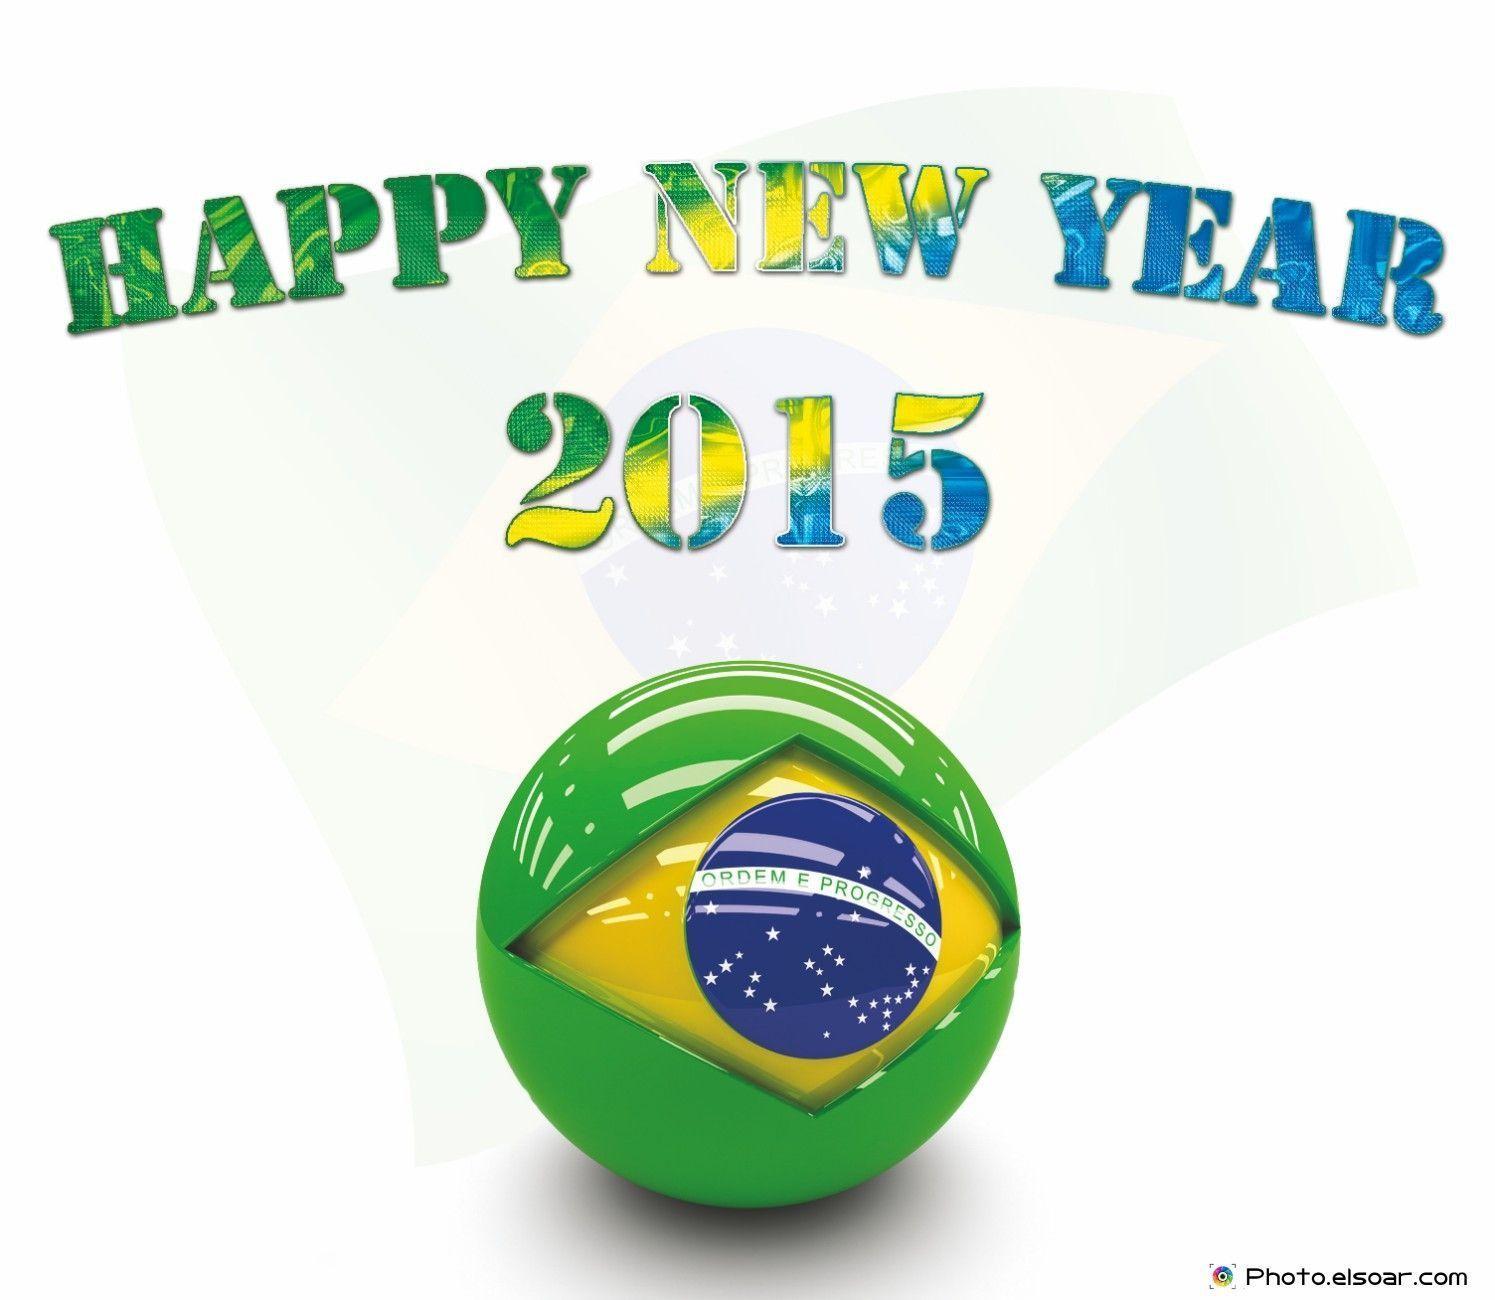 Exclusive: Happy New Year 2015 (Multi Languages) Phrases + Image